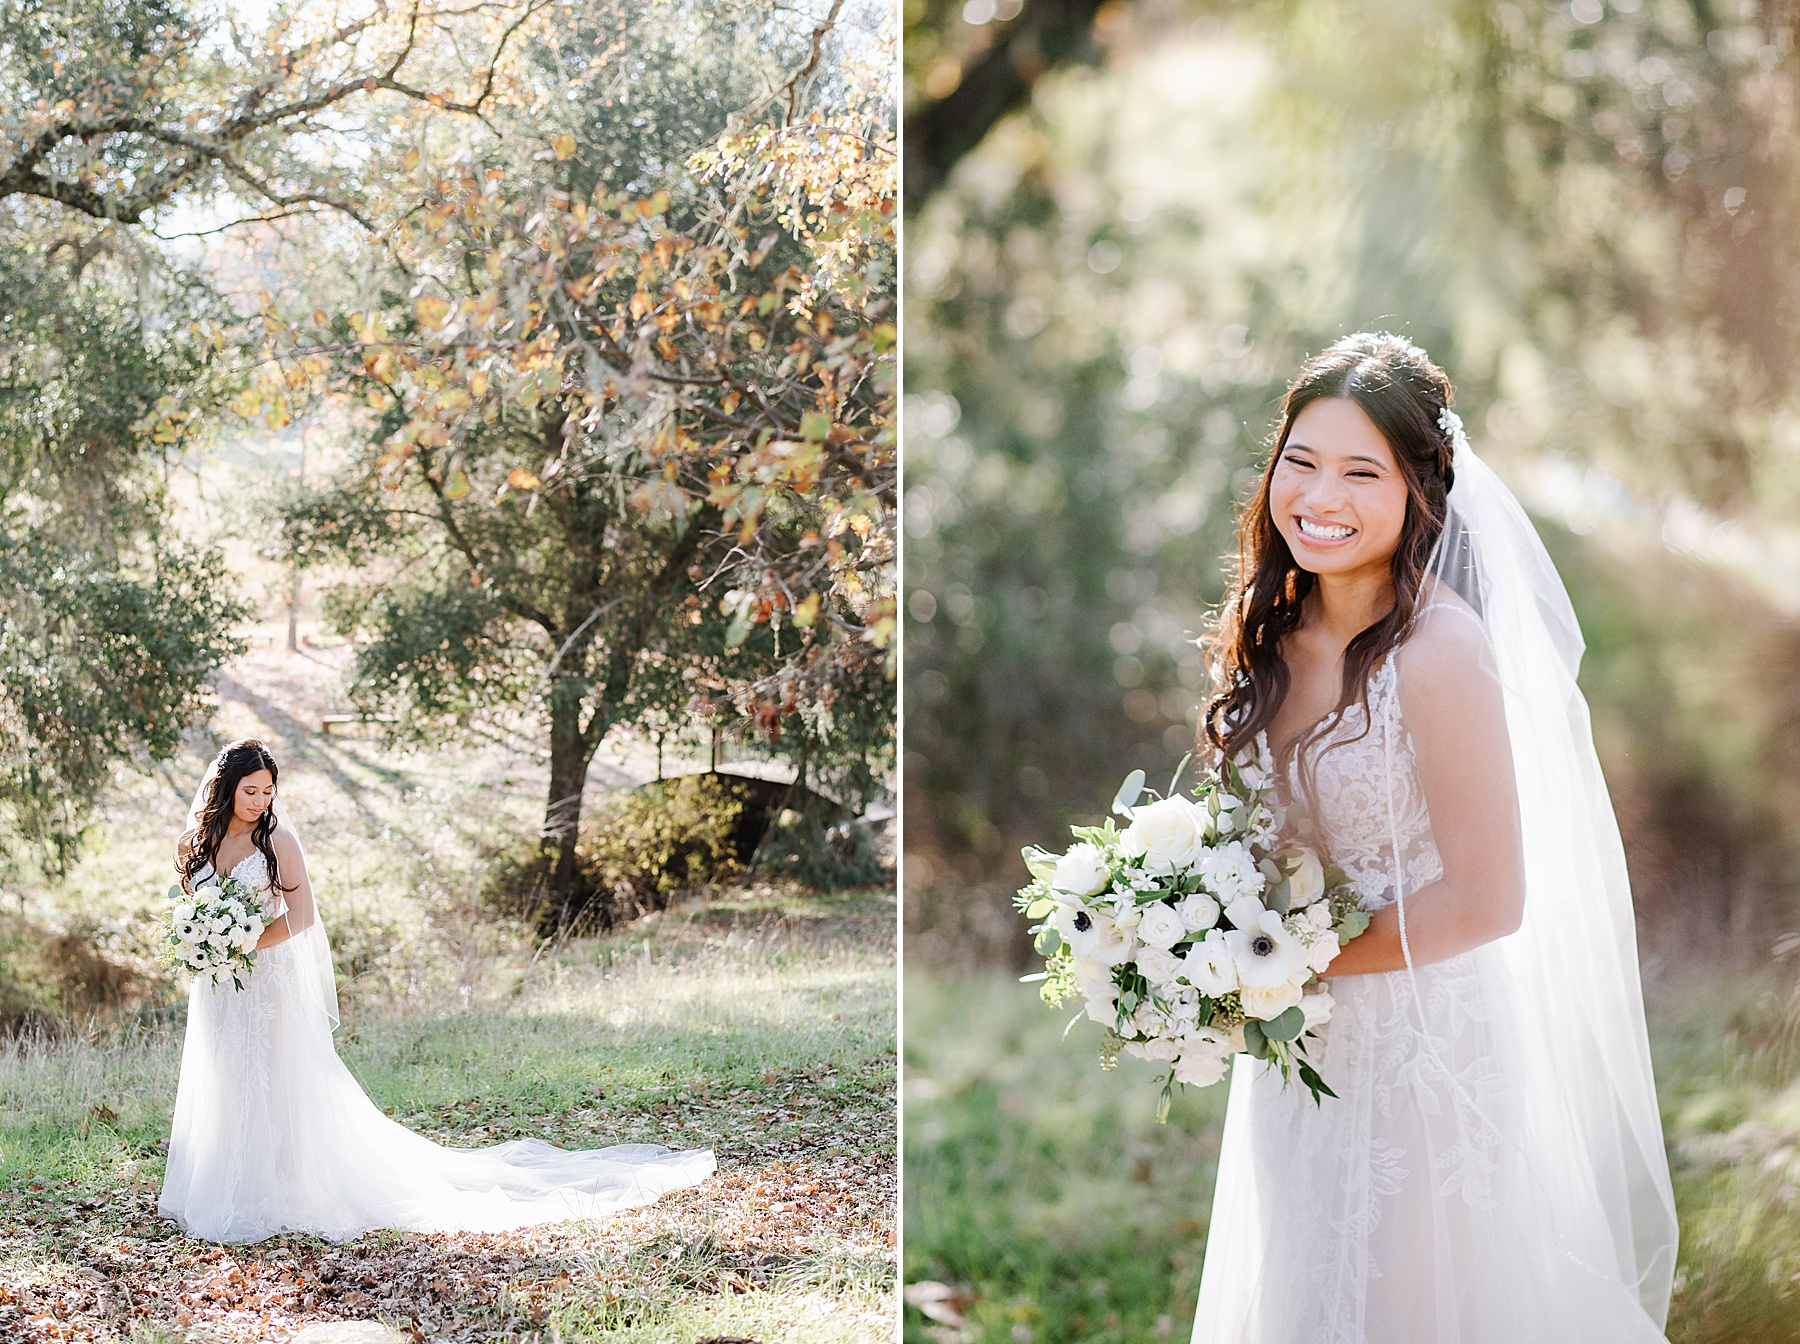 Picking your wedding dress tips by nikkels photography